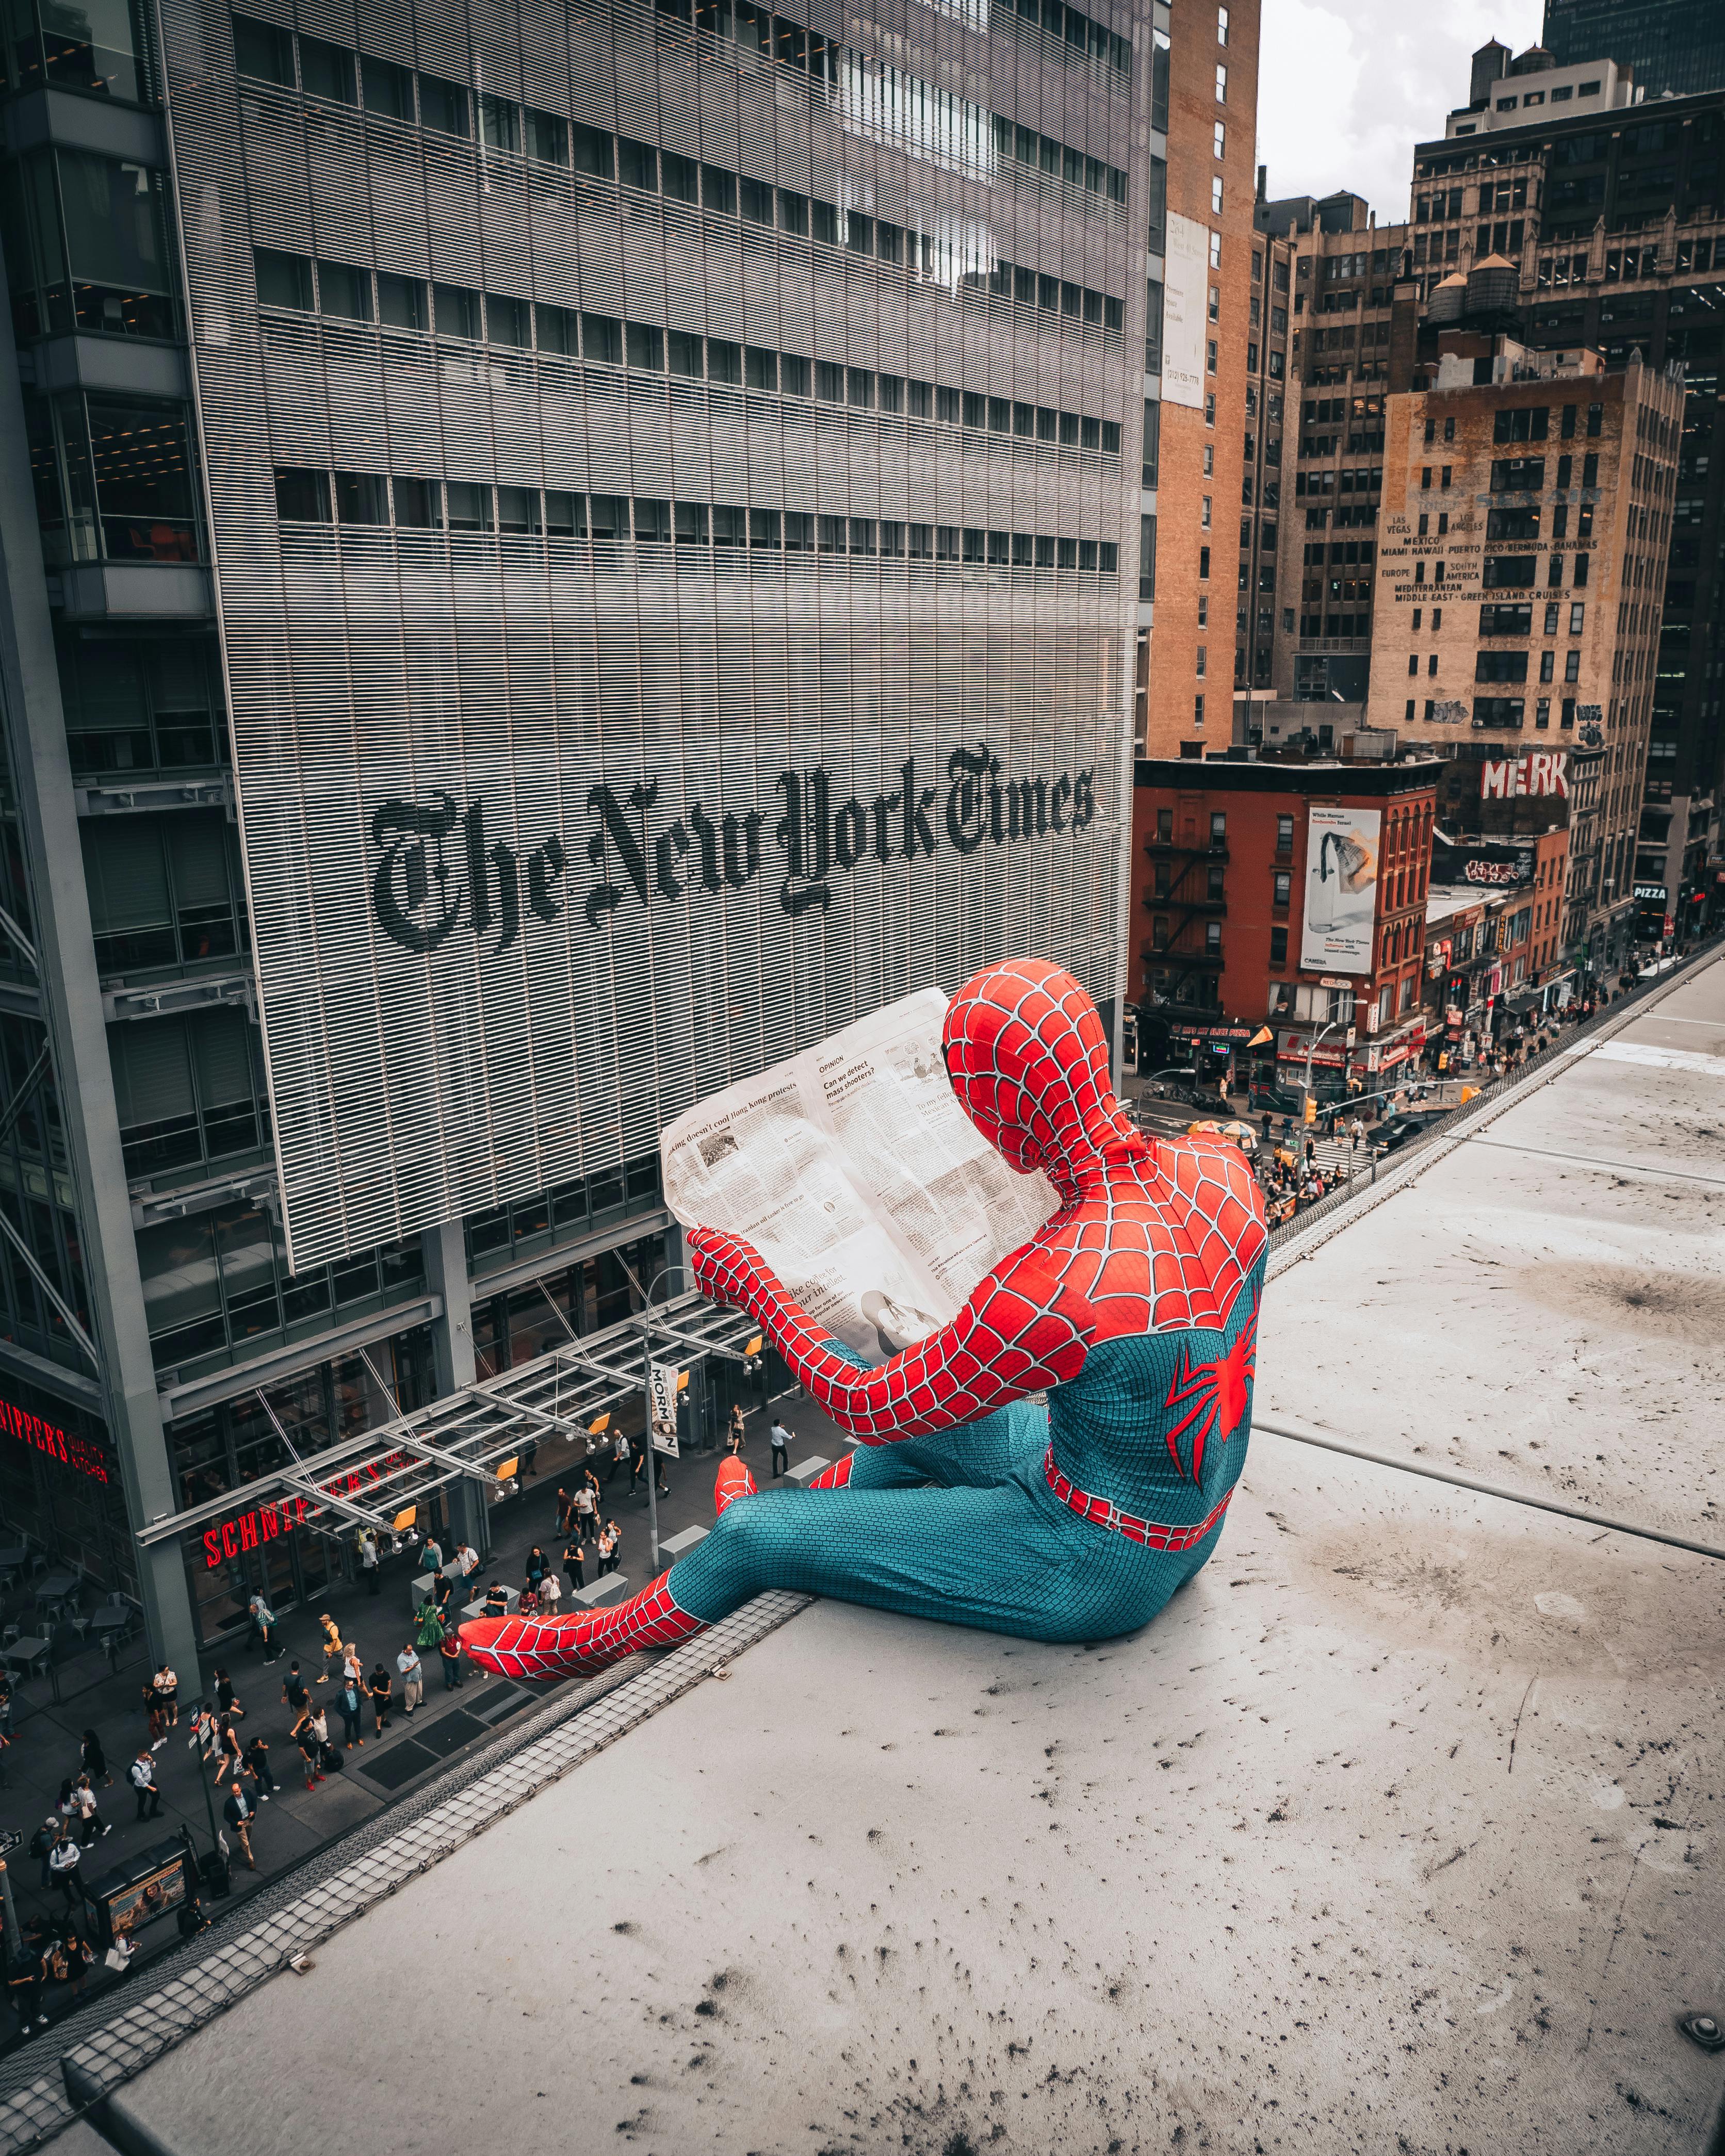 Spiderman Reading Newspaper on Top of Building